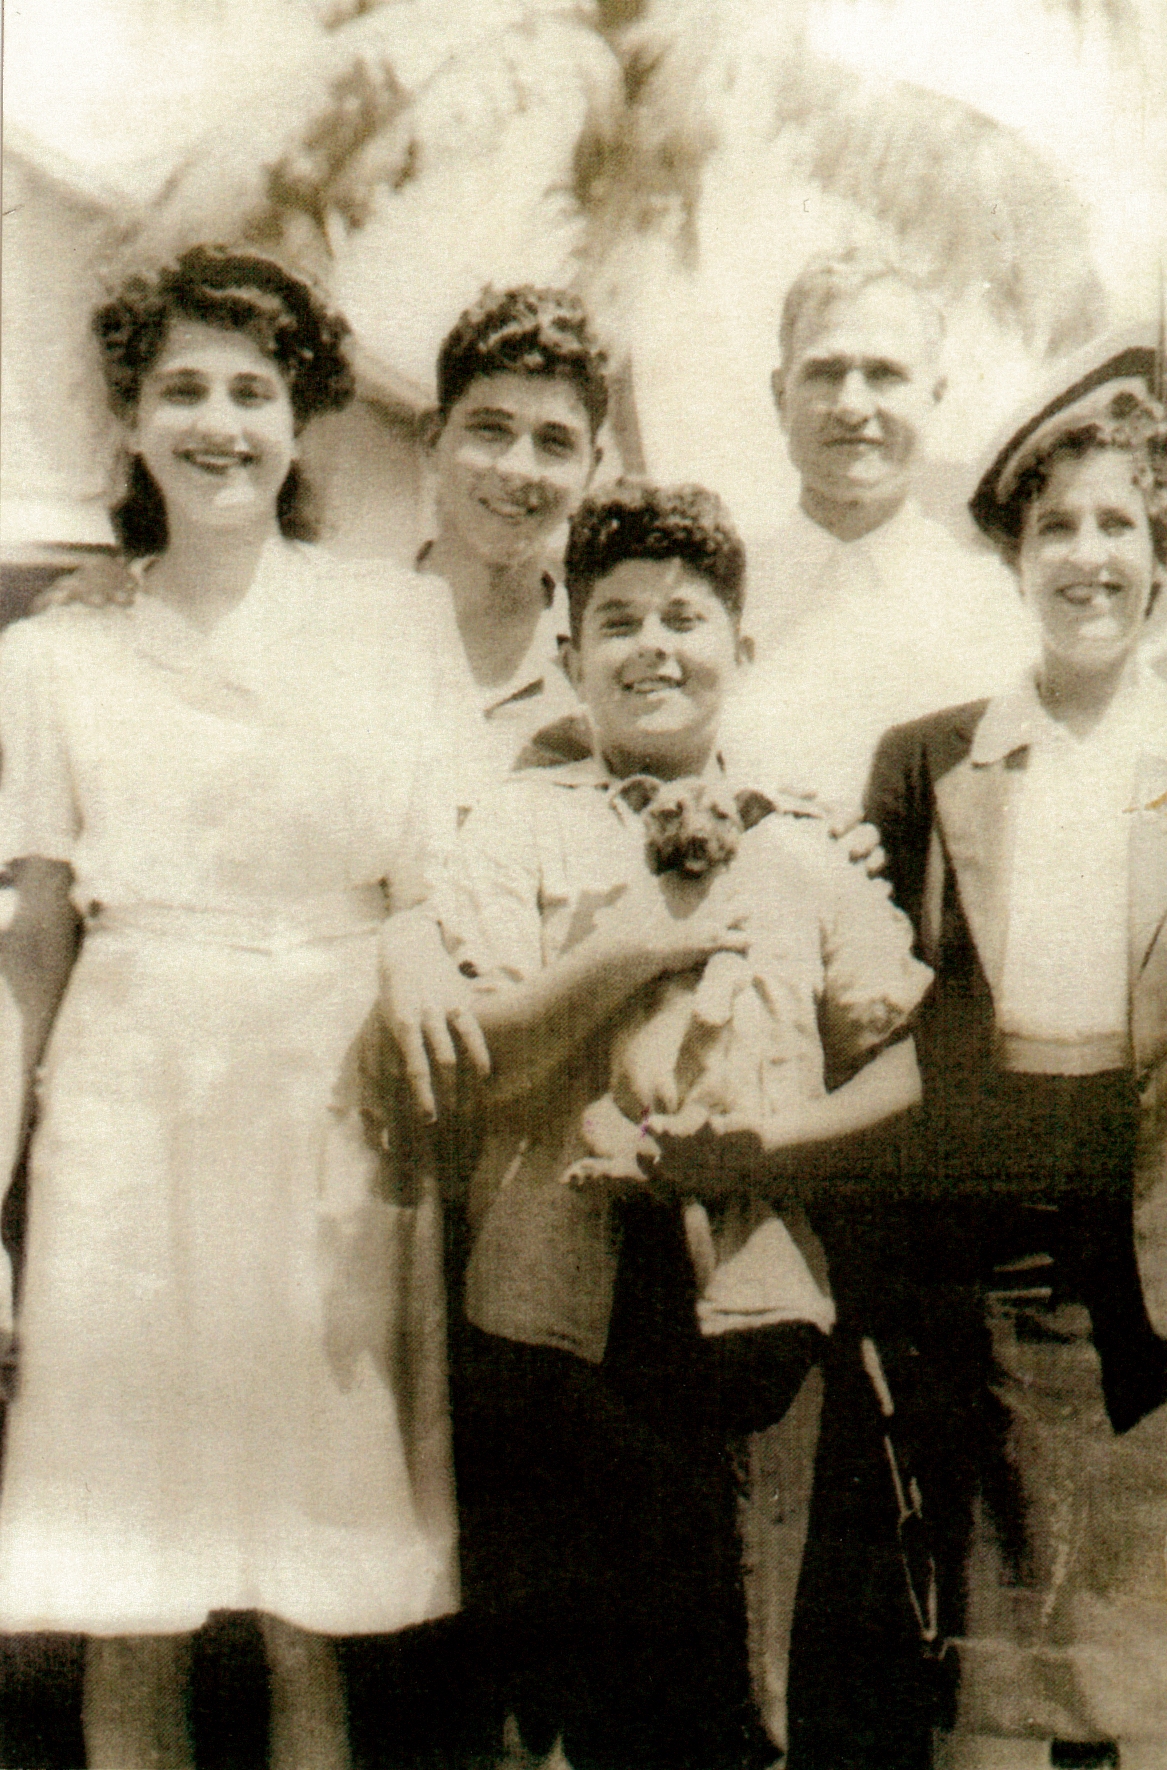 A black and white photo of the Nola family in 1939. The photo includes parents, Mike and Chafica, their teenage children Josephine and William, and youngest son Frank. Frank is holding a puppy.